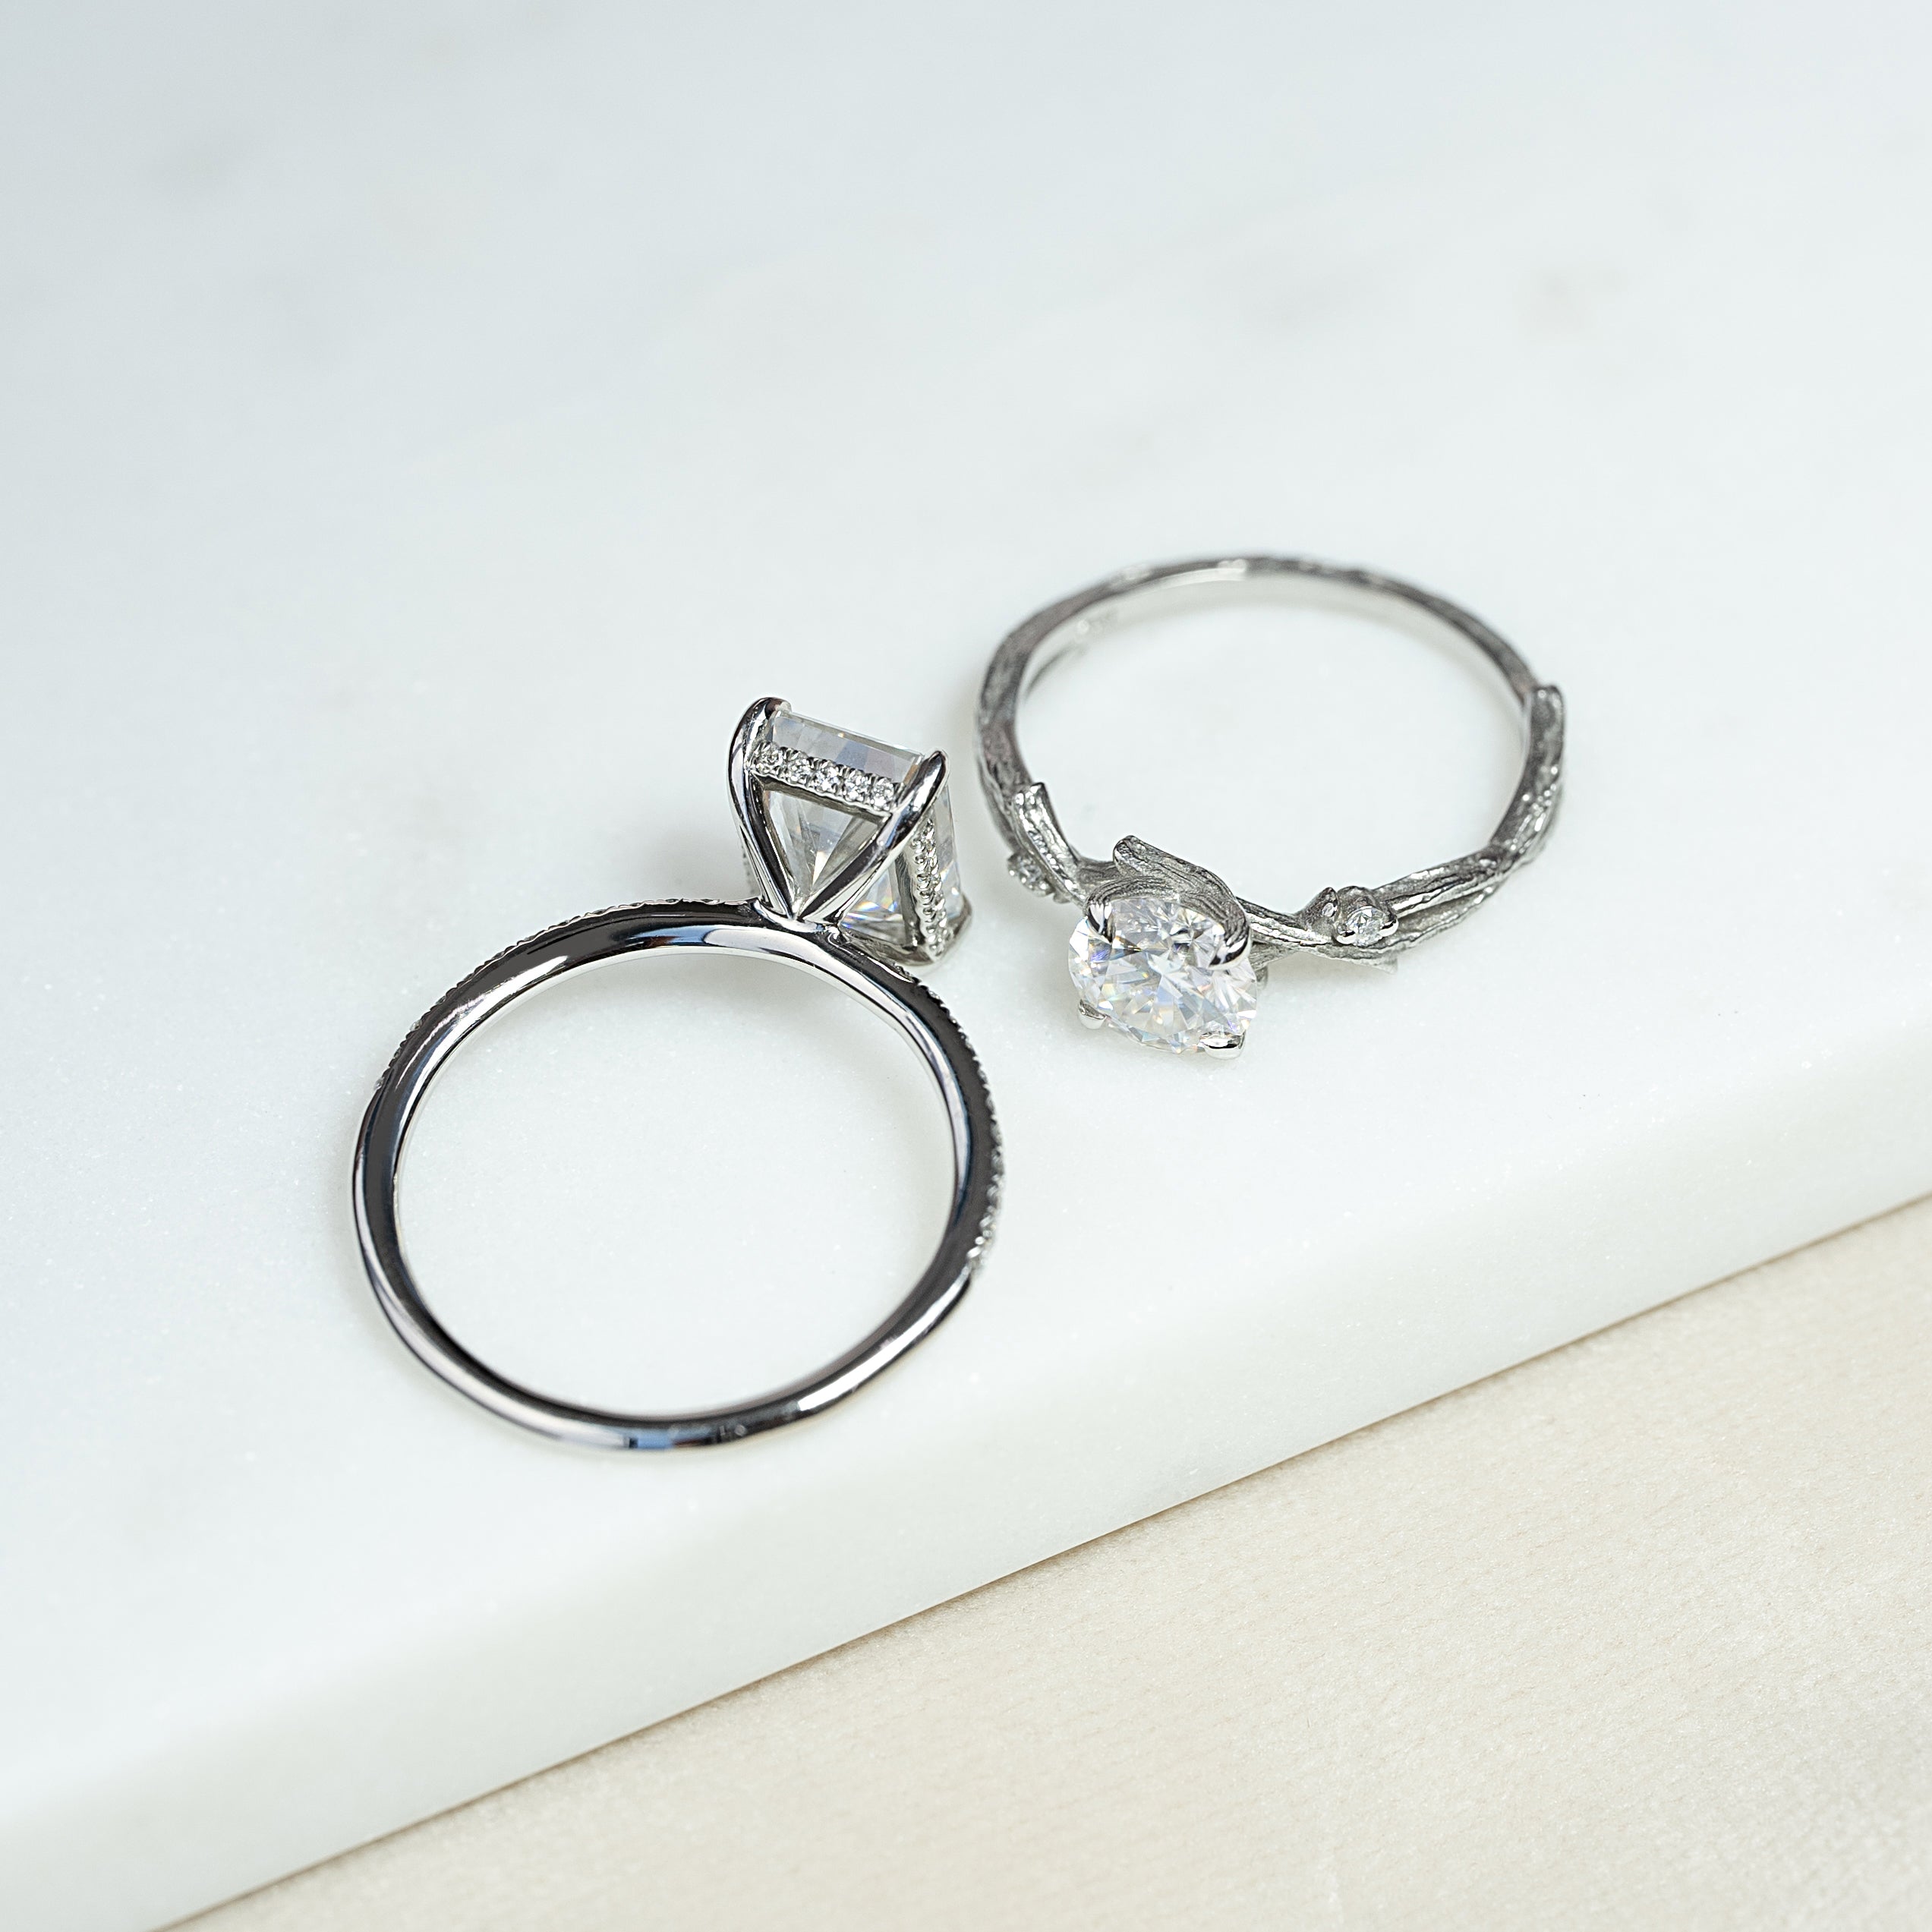 Everything You Need to Know About Platinum Engagement Rings